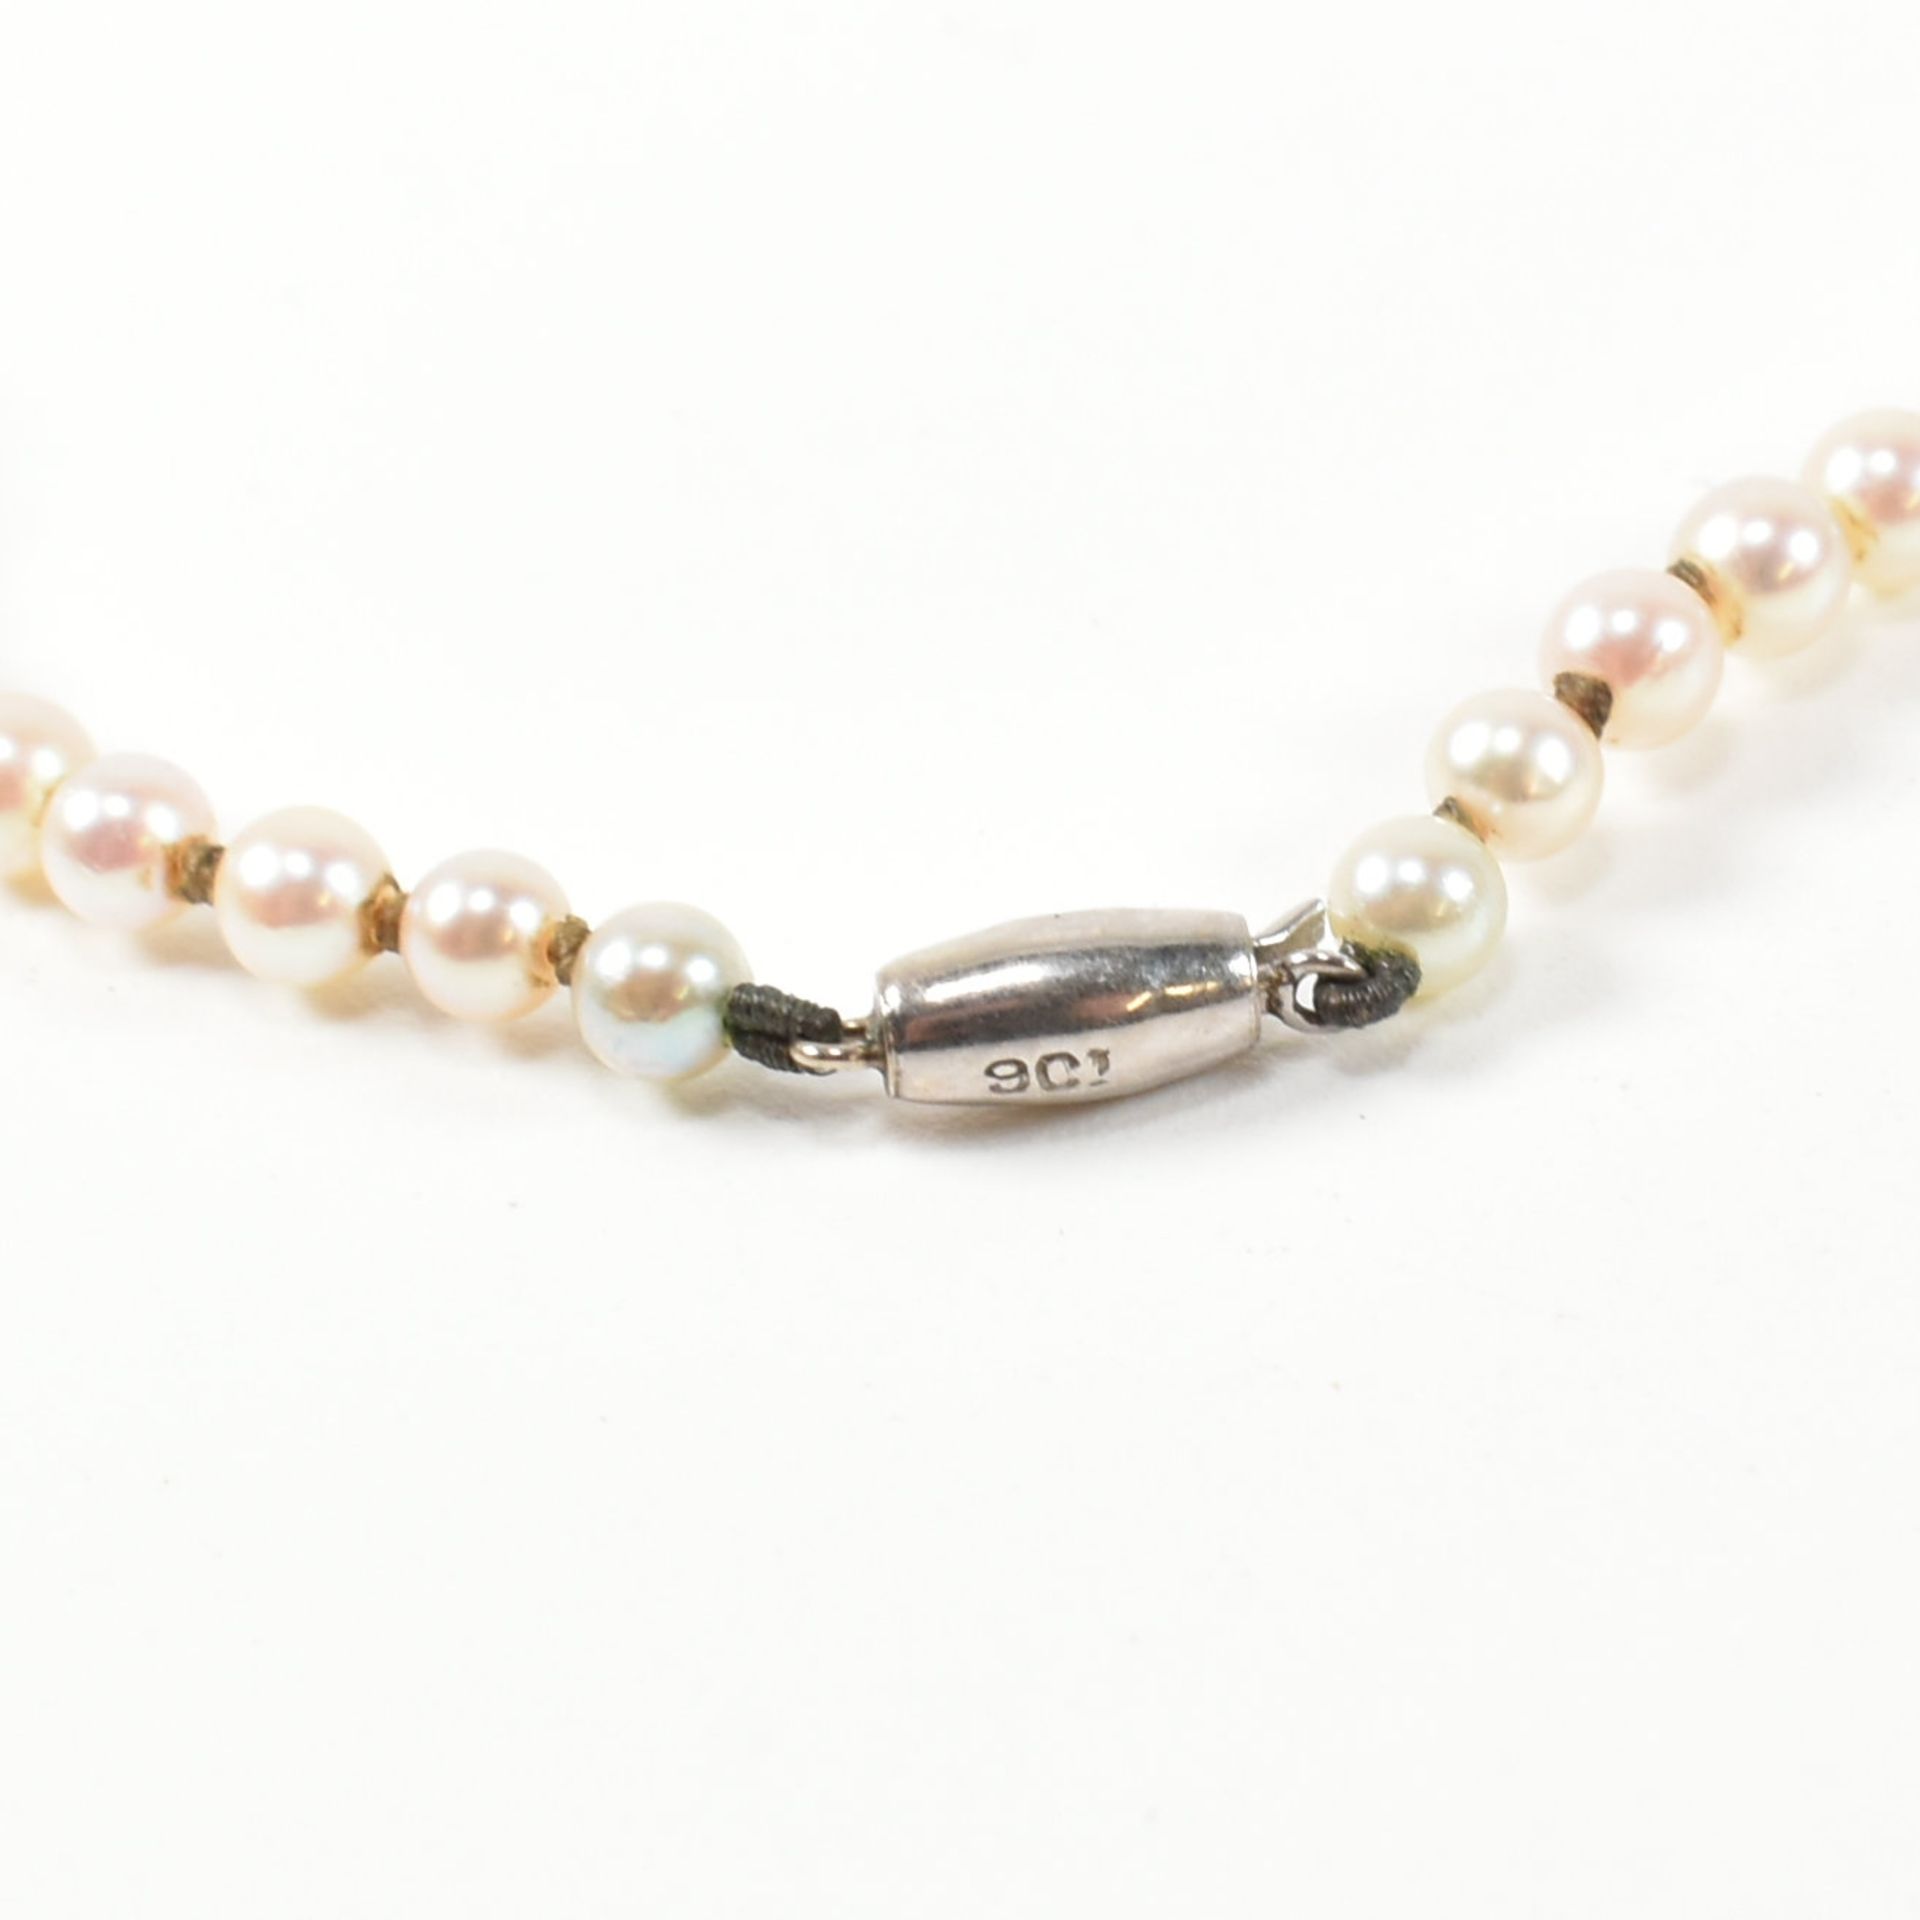 9CT WHITE GOLD & CULTURED PEARL NECKLACE - Image 4 of 5